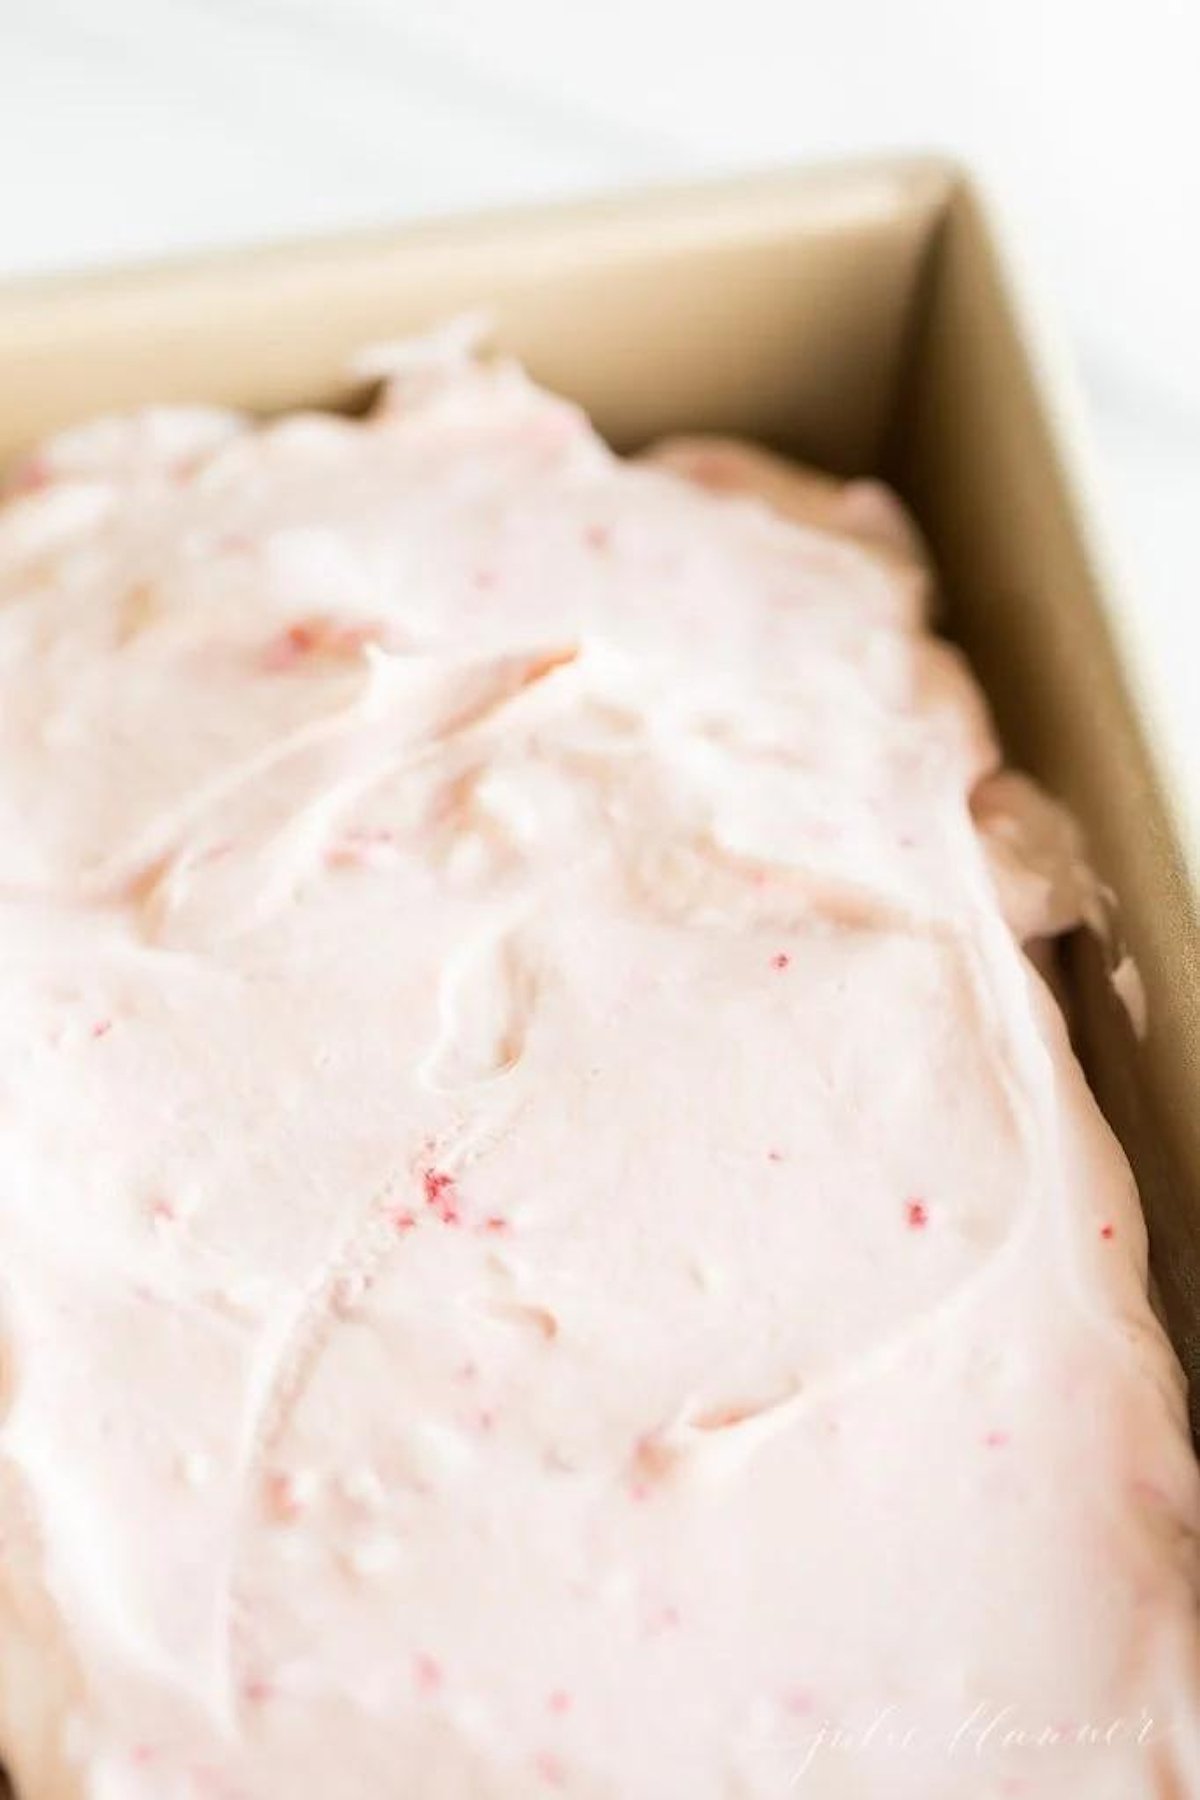 A pink cake with peppermint stick ice cream frosting in a pan.